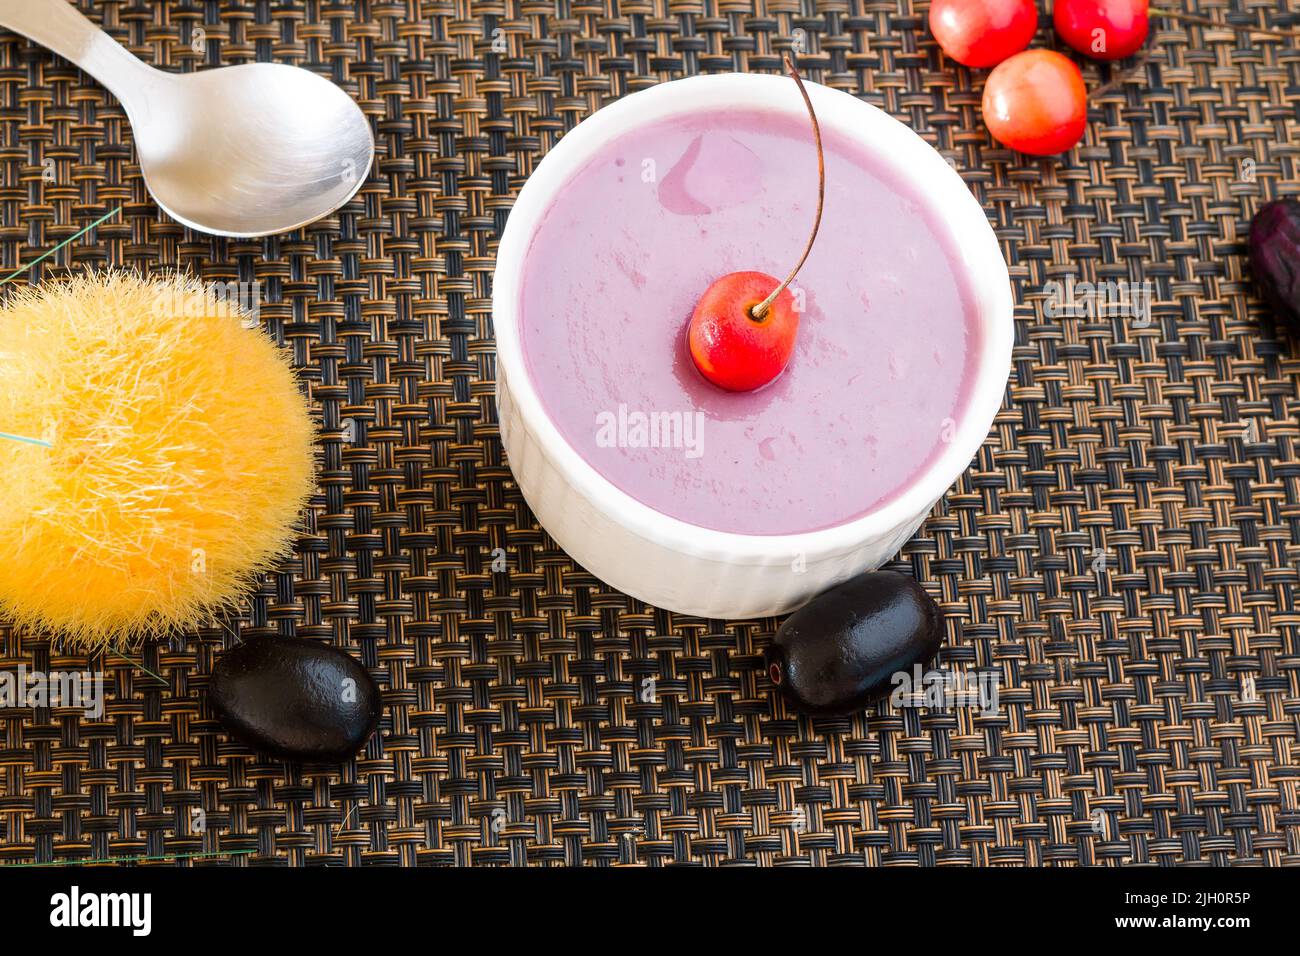 Jamun Mousse or Black Plum Mousse topped with cherries.Fresh,homemade vegan dessert.Top view,closeup of bowl isolated on dark background.Copy space. Stock Photo